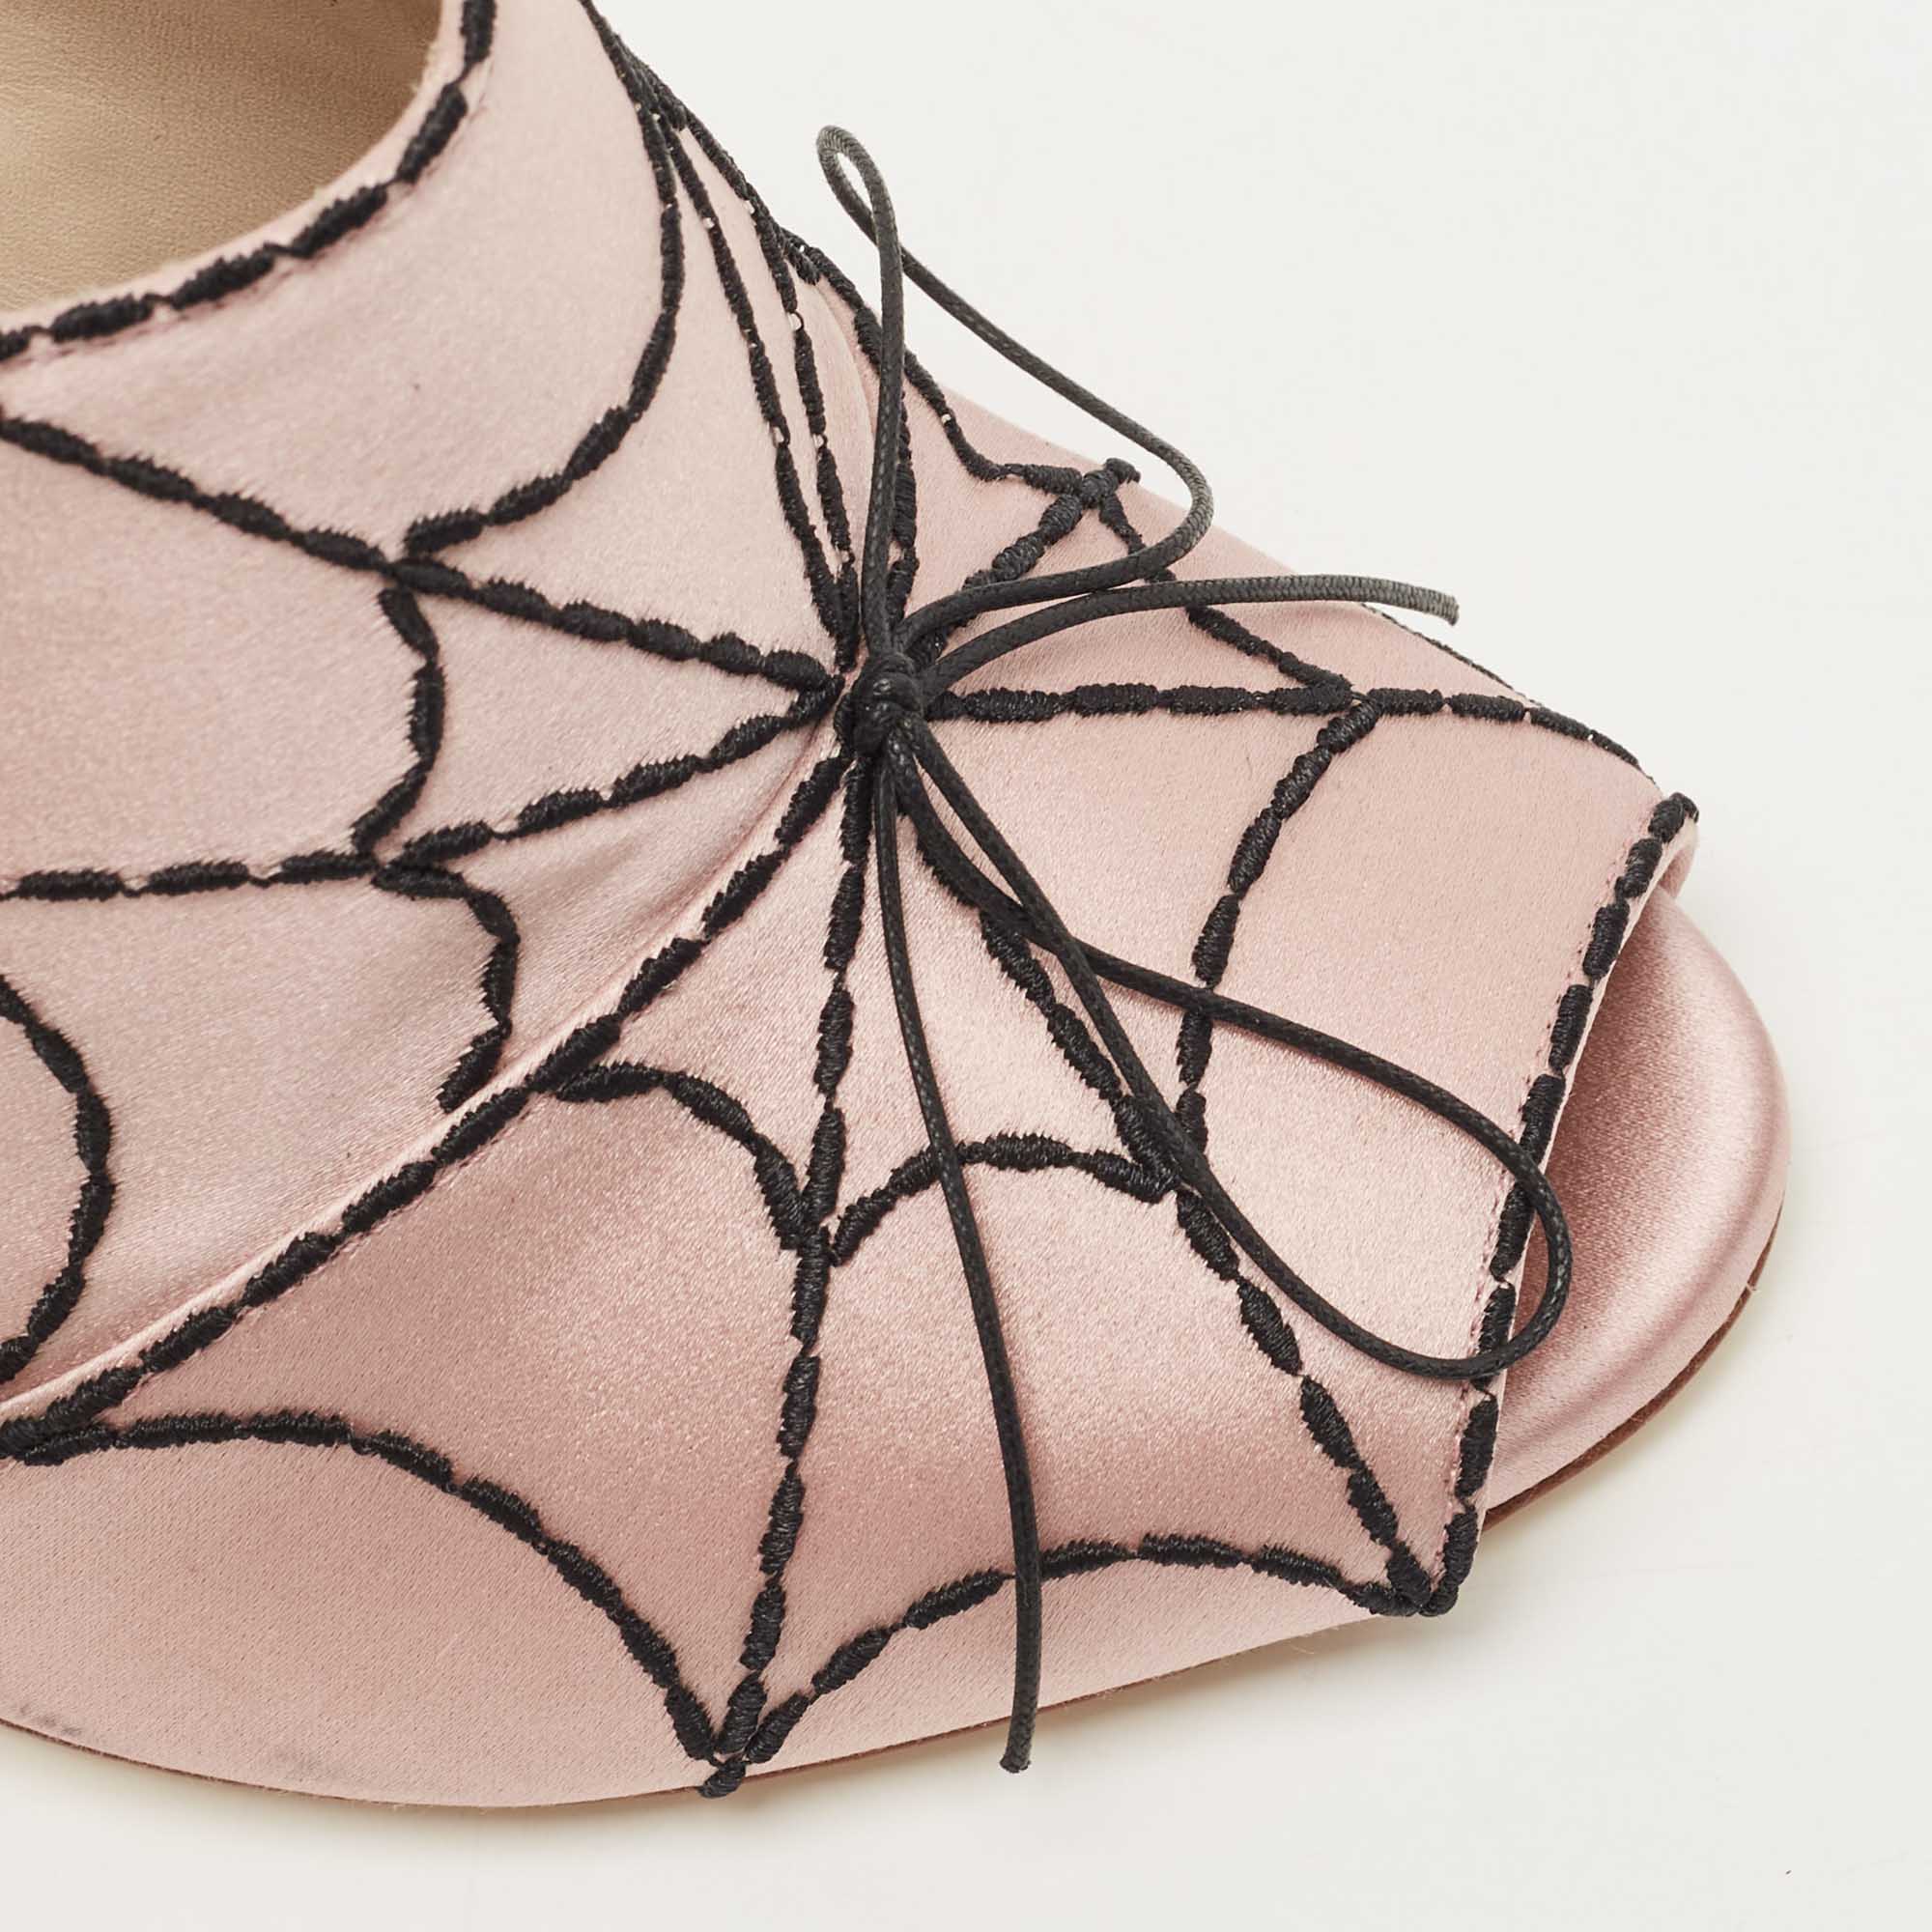 Marco De Vincenzo Pink Satin Embroidered Spider Web Mules Size 39